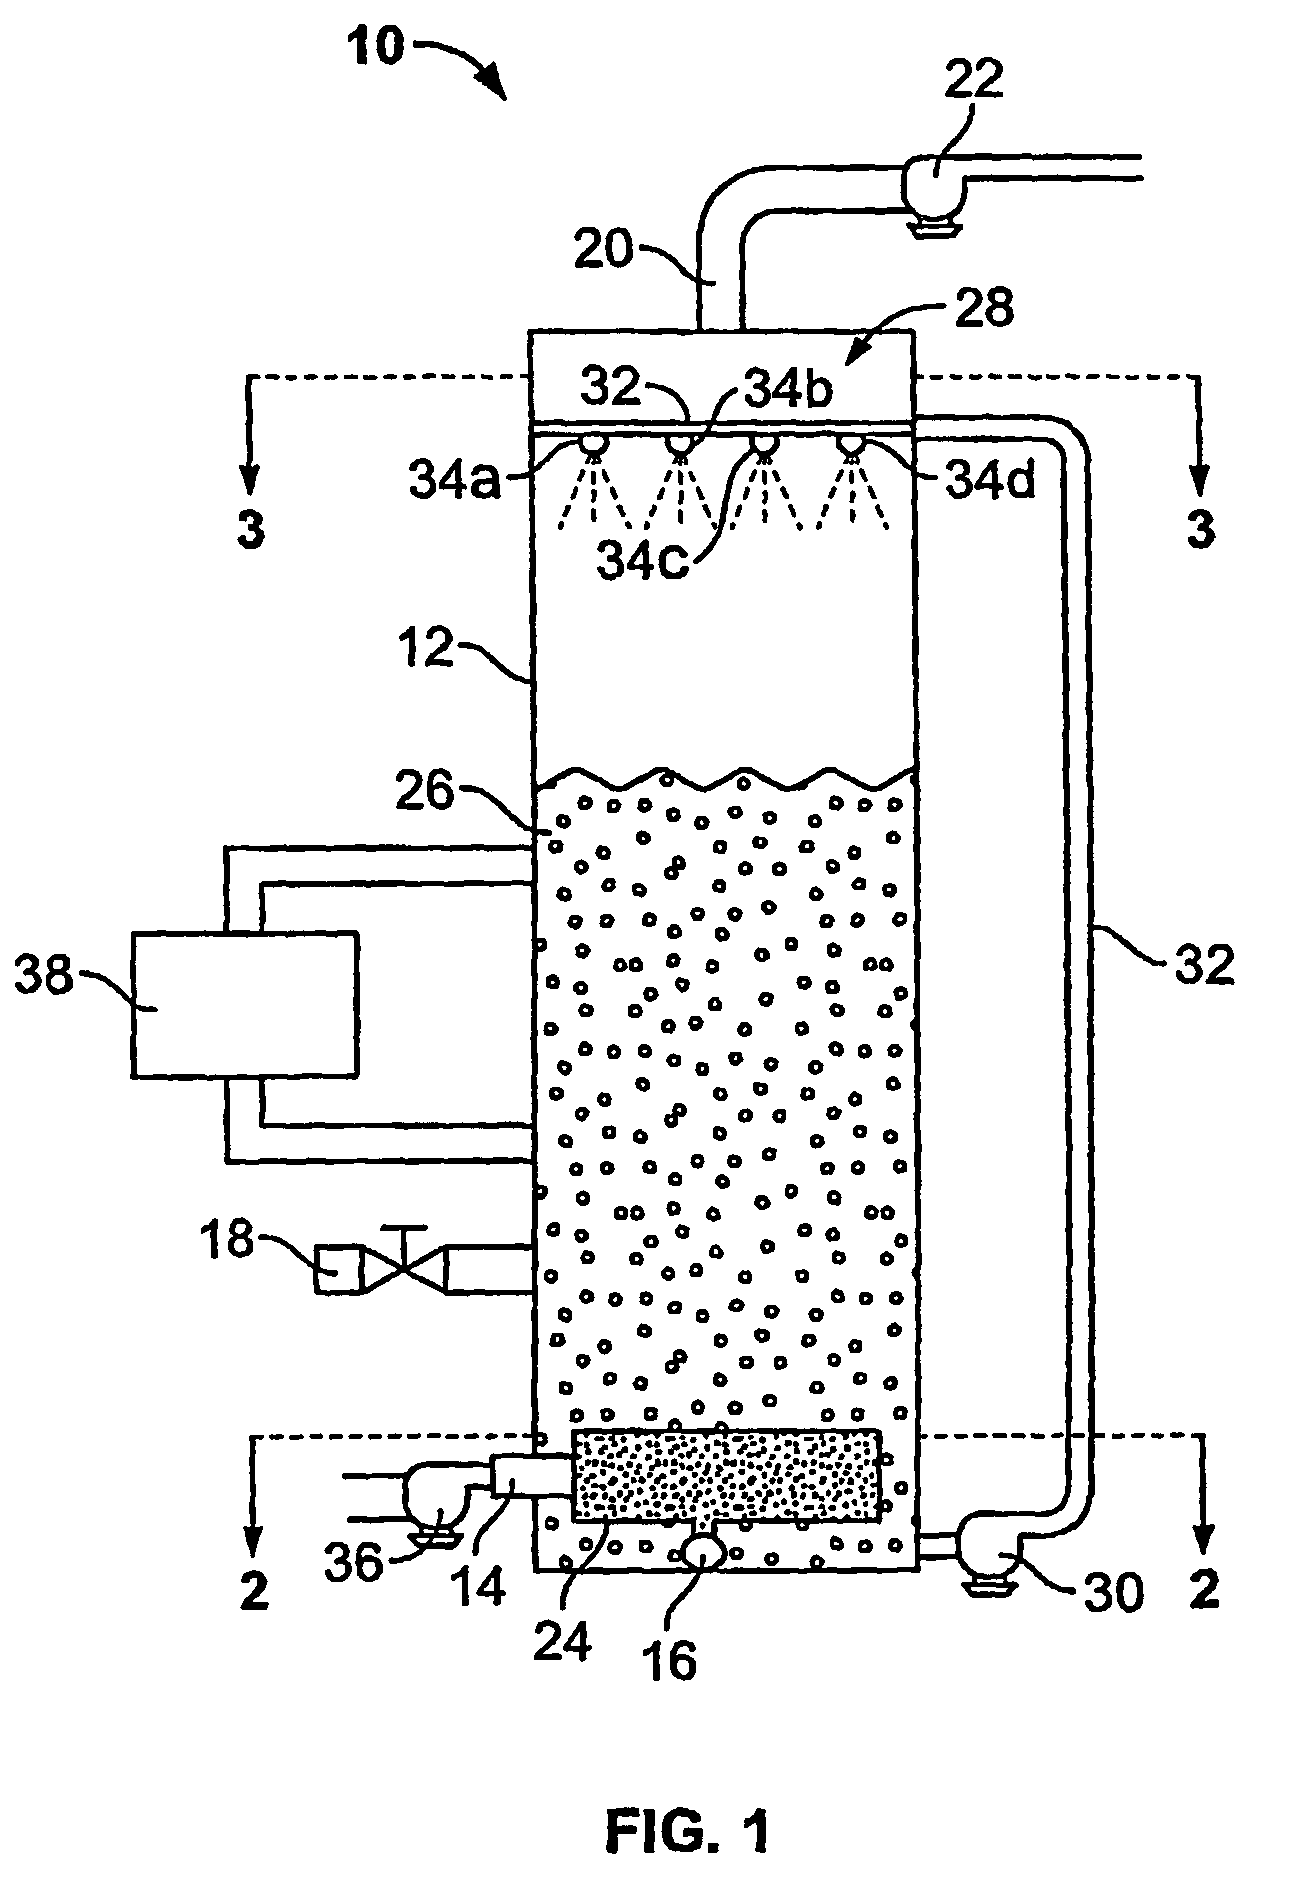 Device for removing particulate, various acids, and other contaminants from industrial gases